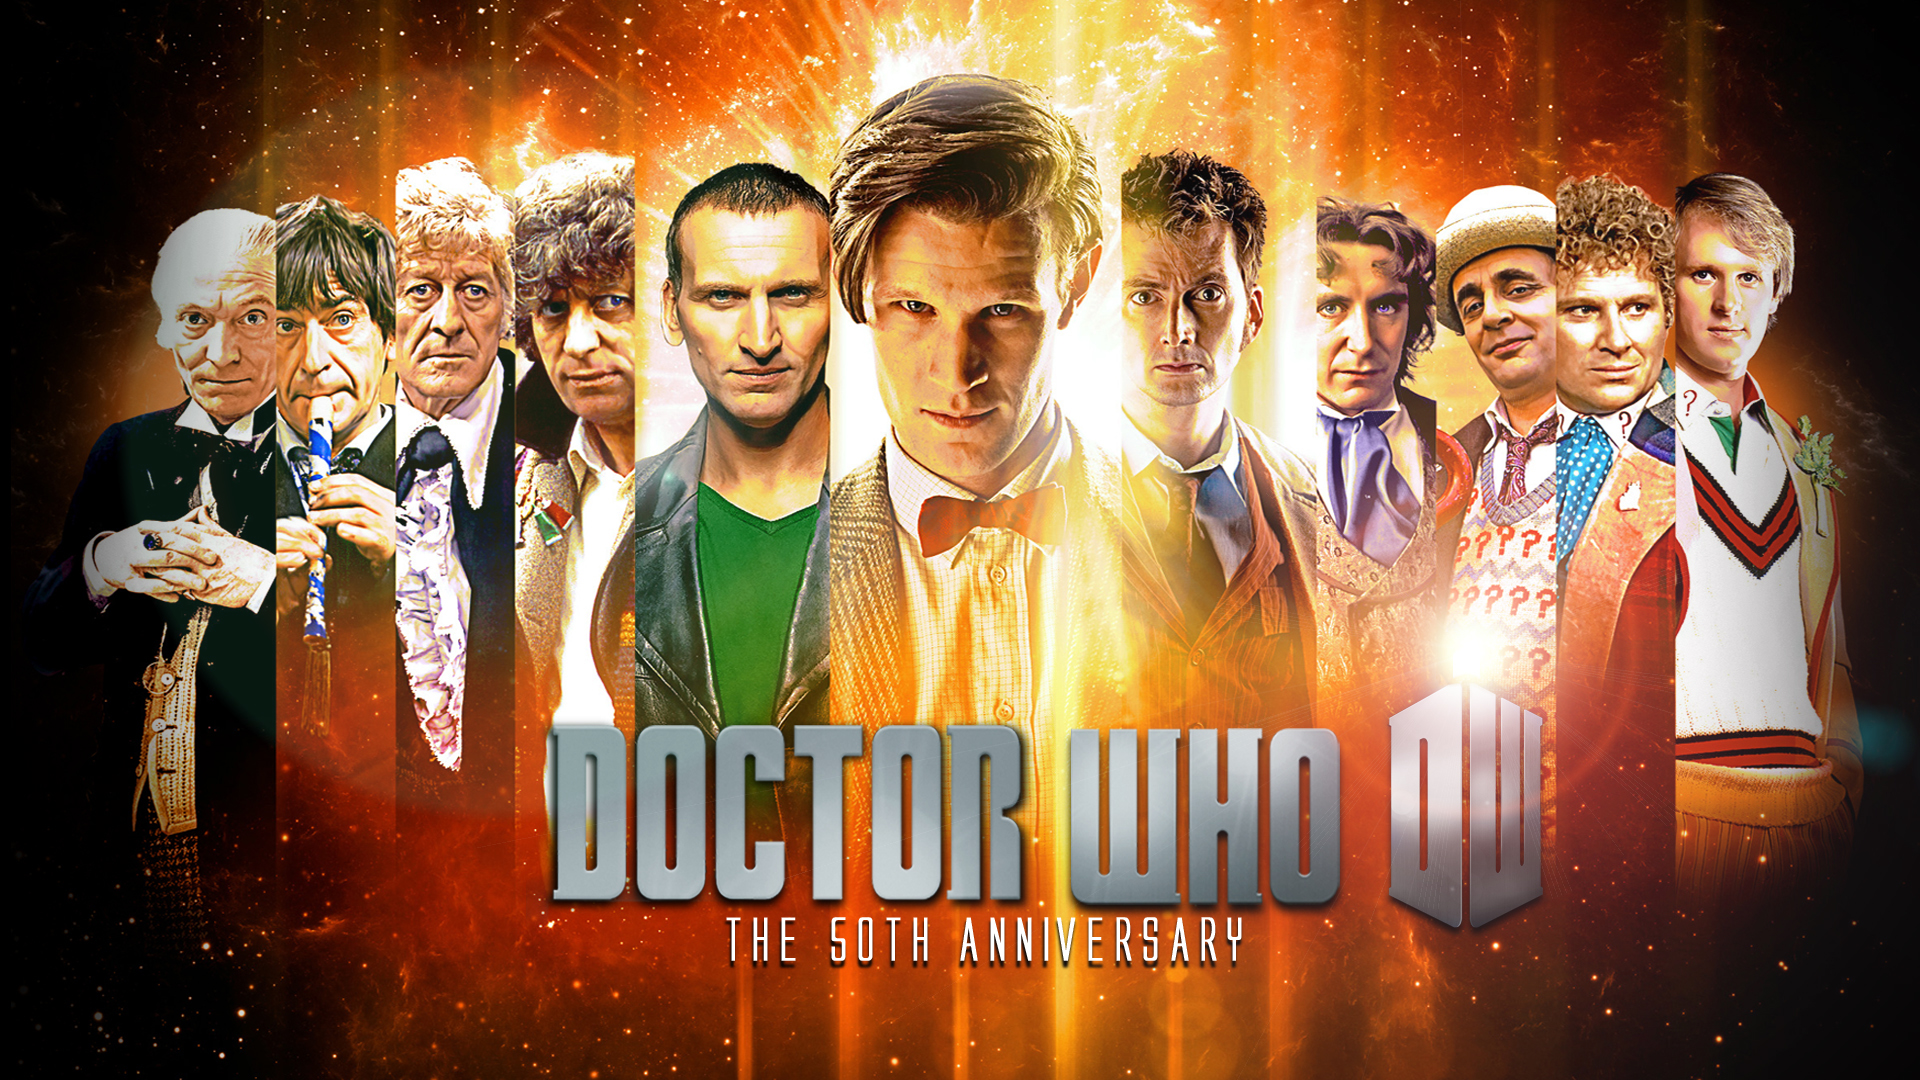 Doctor Who The 50th Anniversary Wallpaper